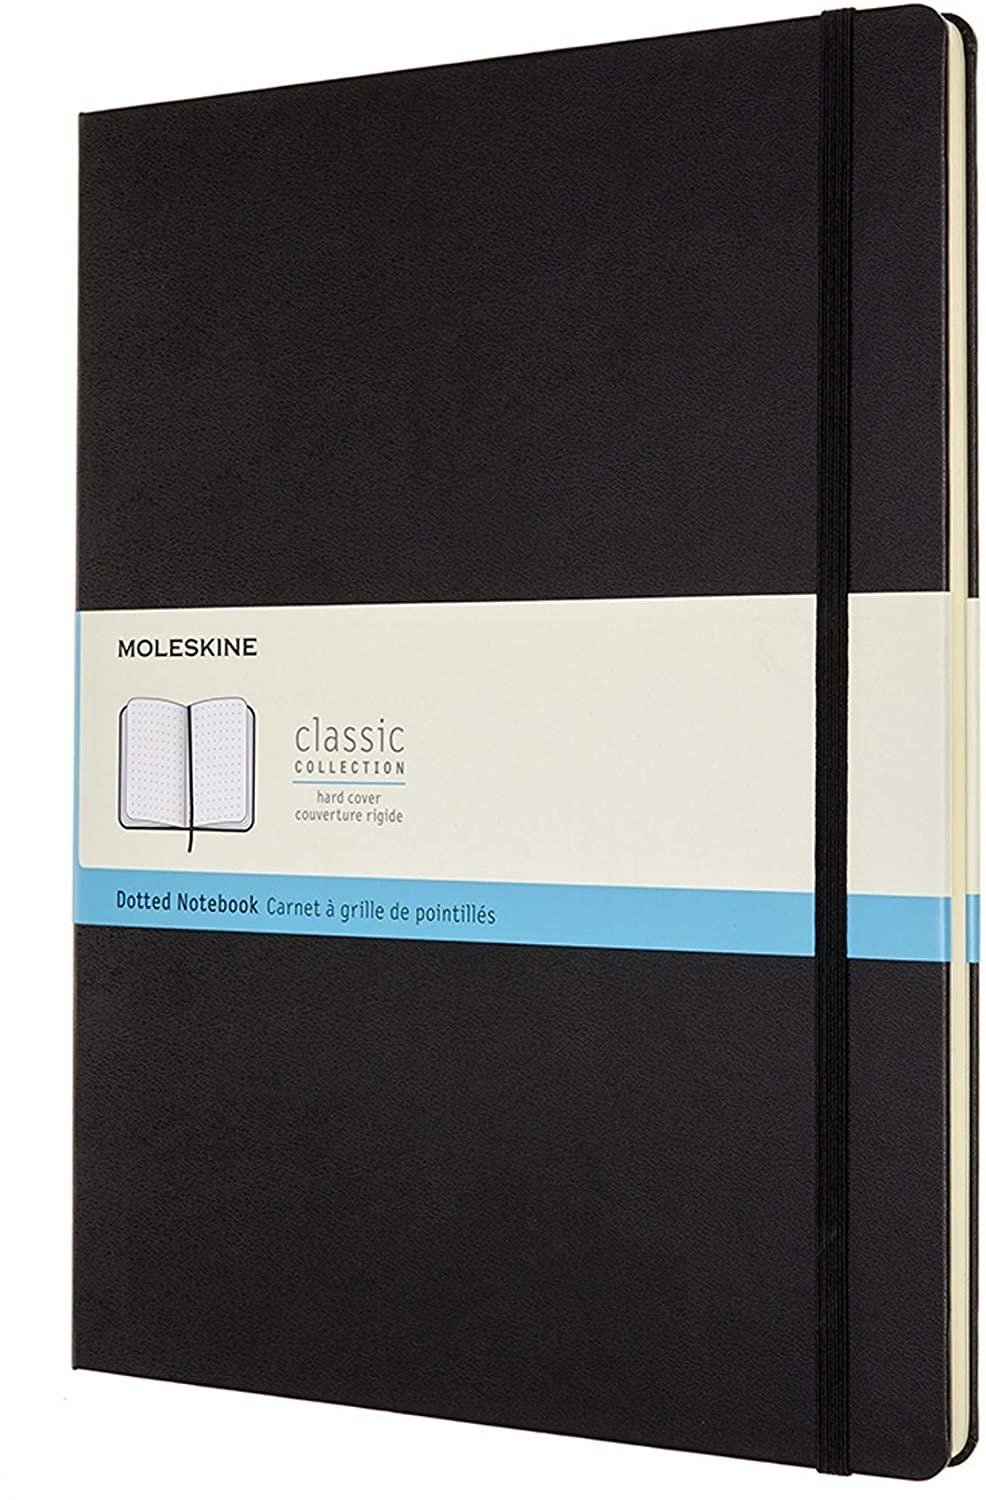 Moleskine Notebook Xxl Dotted Black Hard Cover